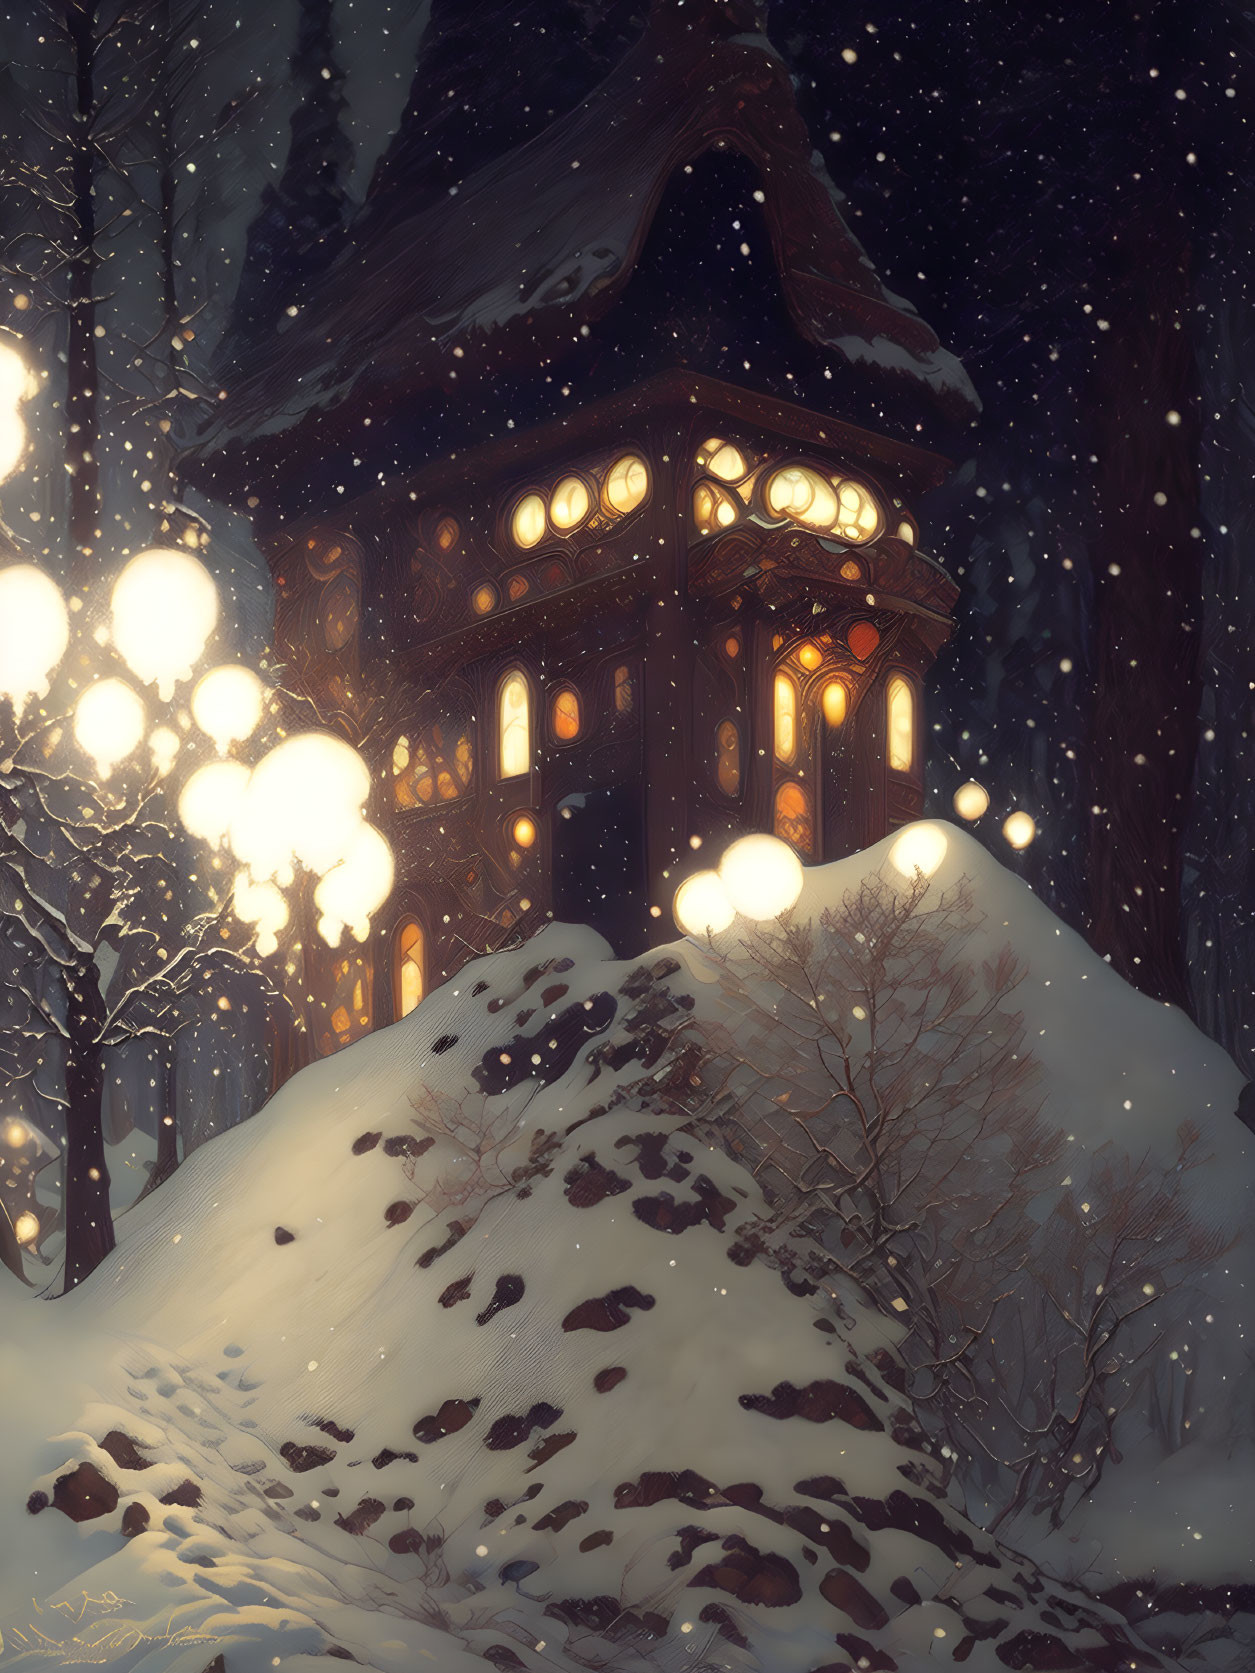 Snowy hill cabin surrounded by trees in tranquil nighttime scene